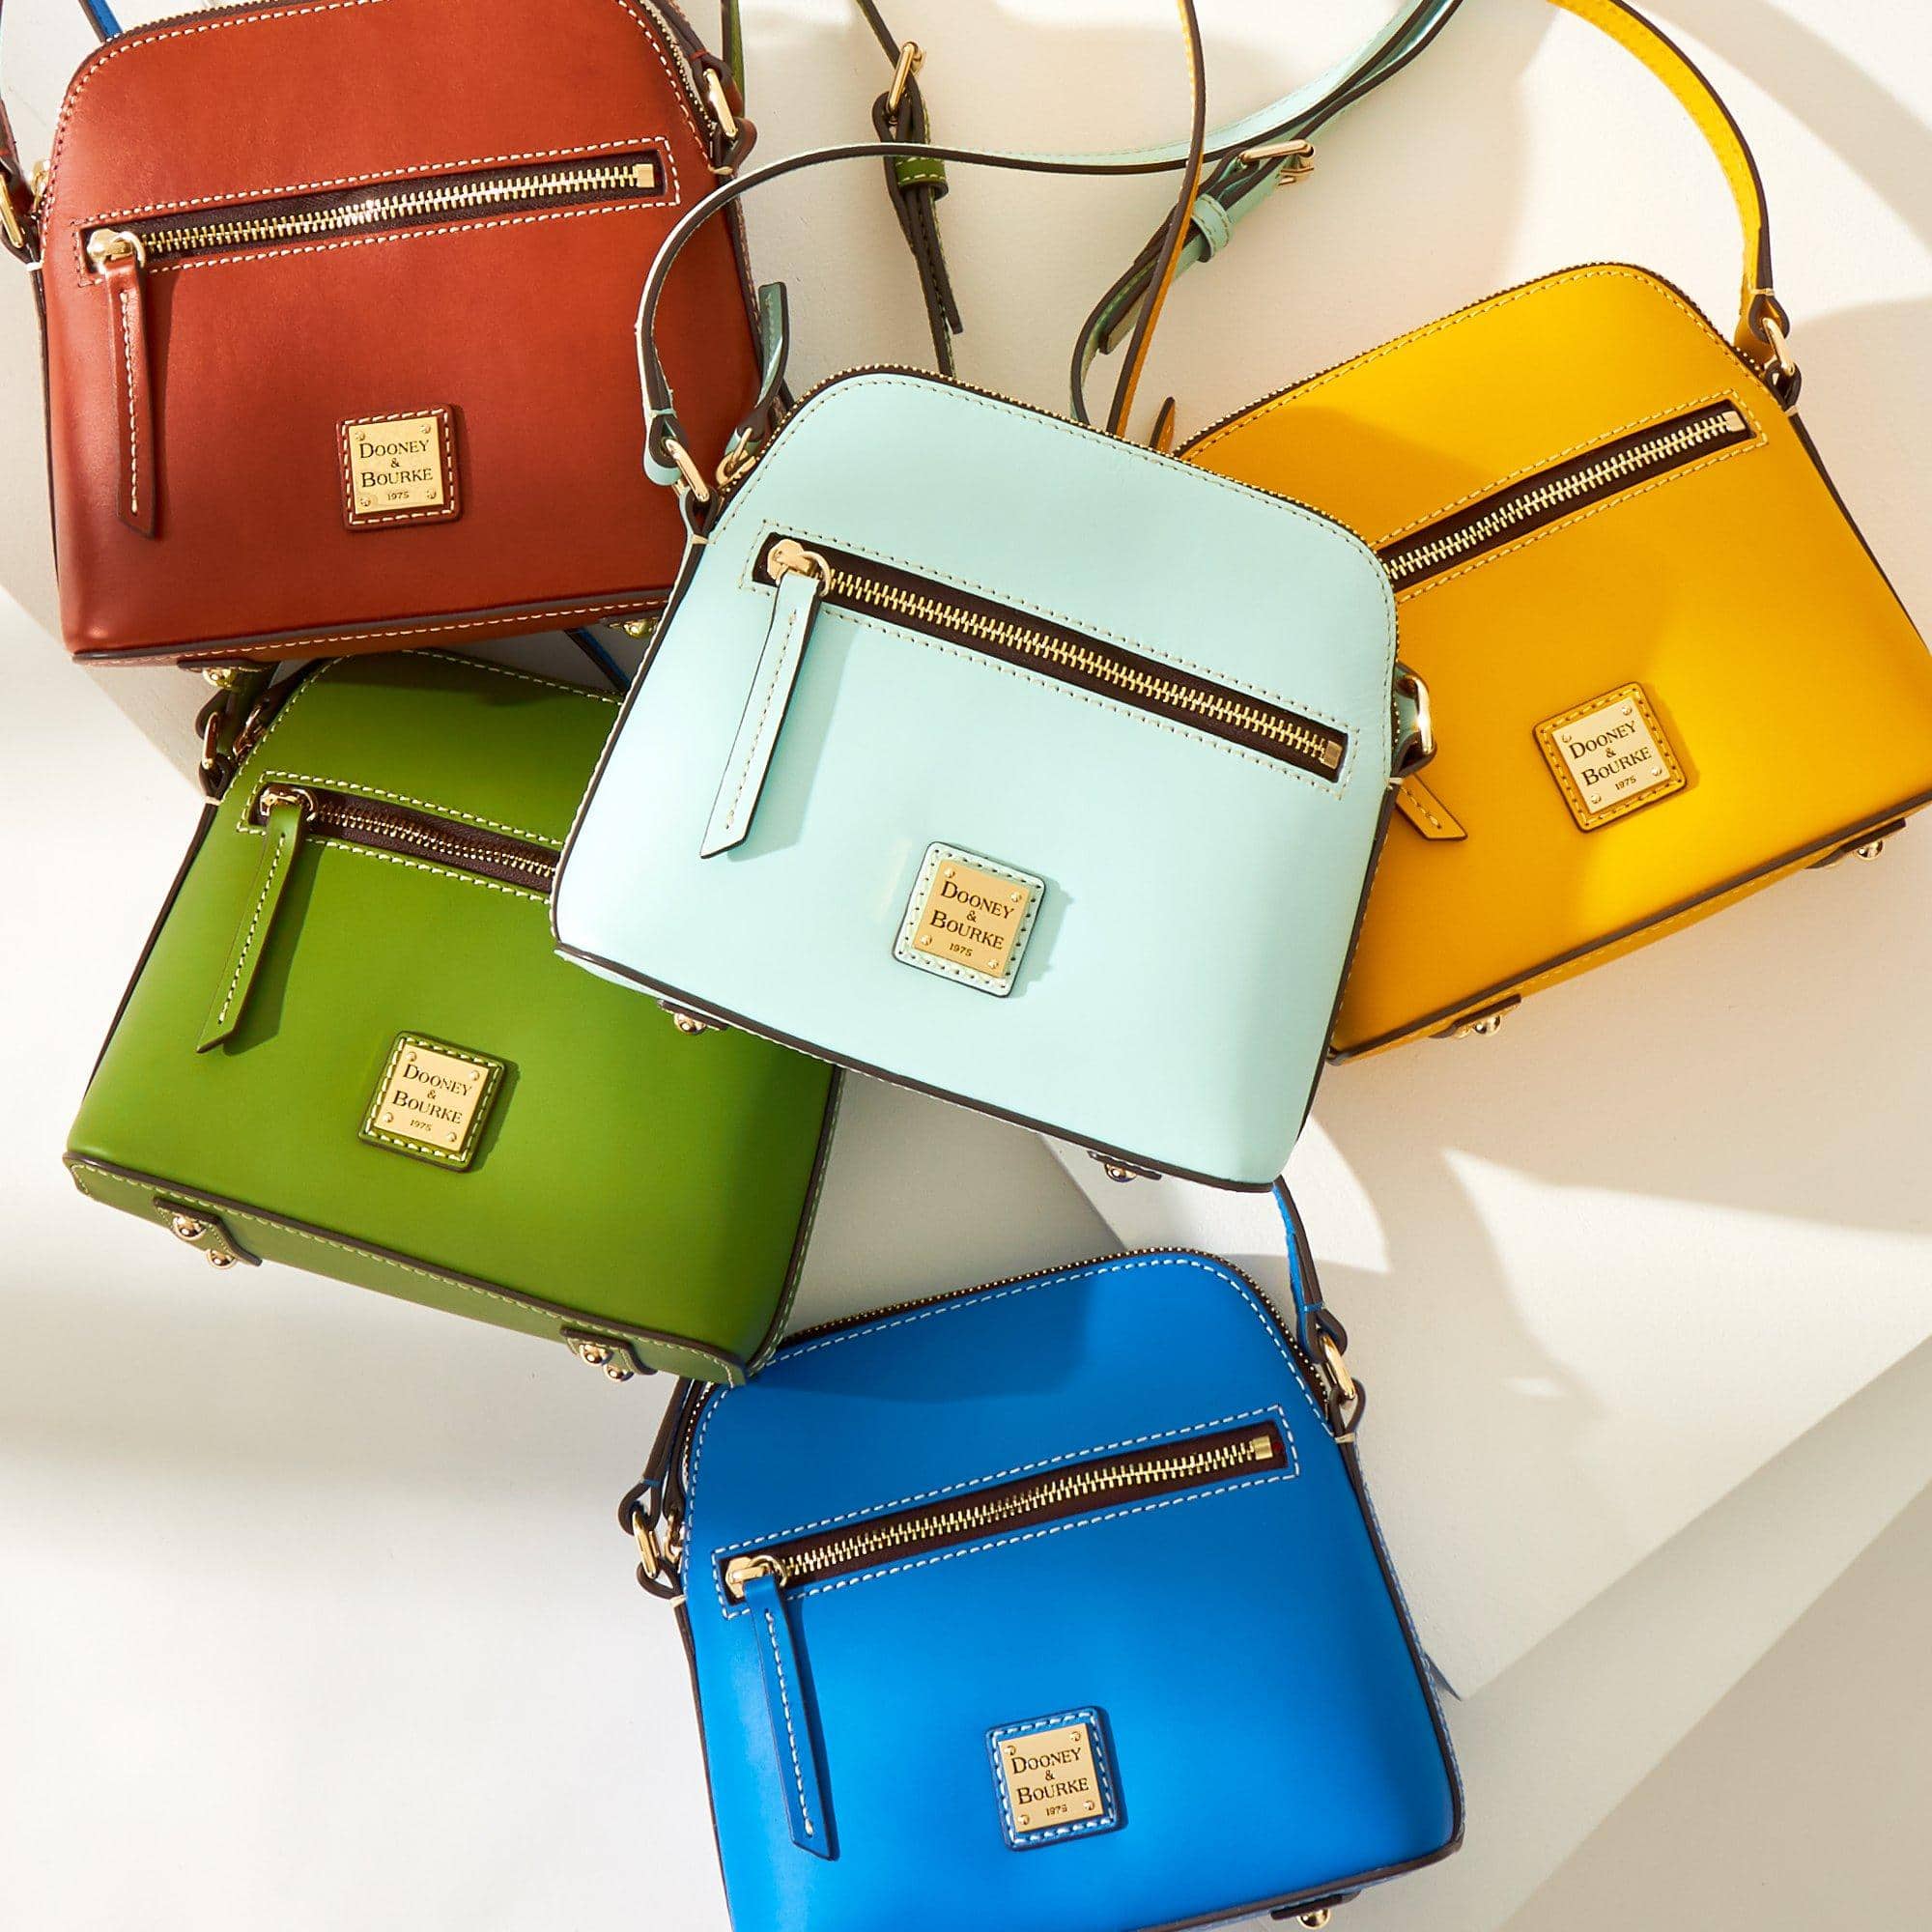 A compact crossbody bag that can carry your day-t0-night essentials